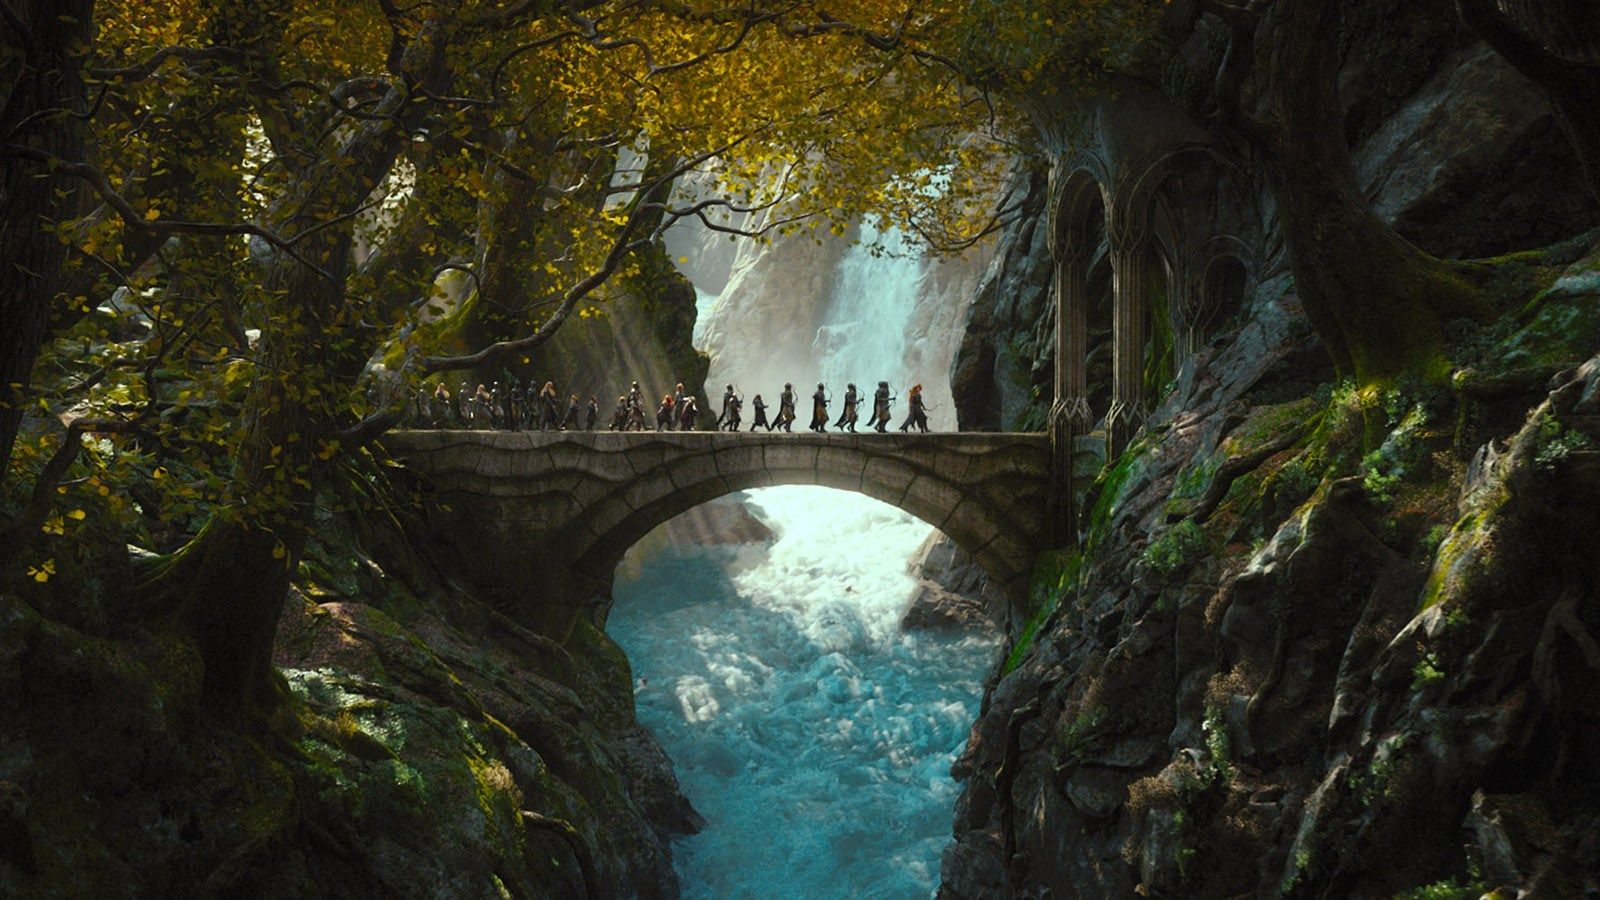 Lord Of The Rings 4K Wallpapers